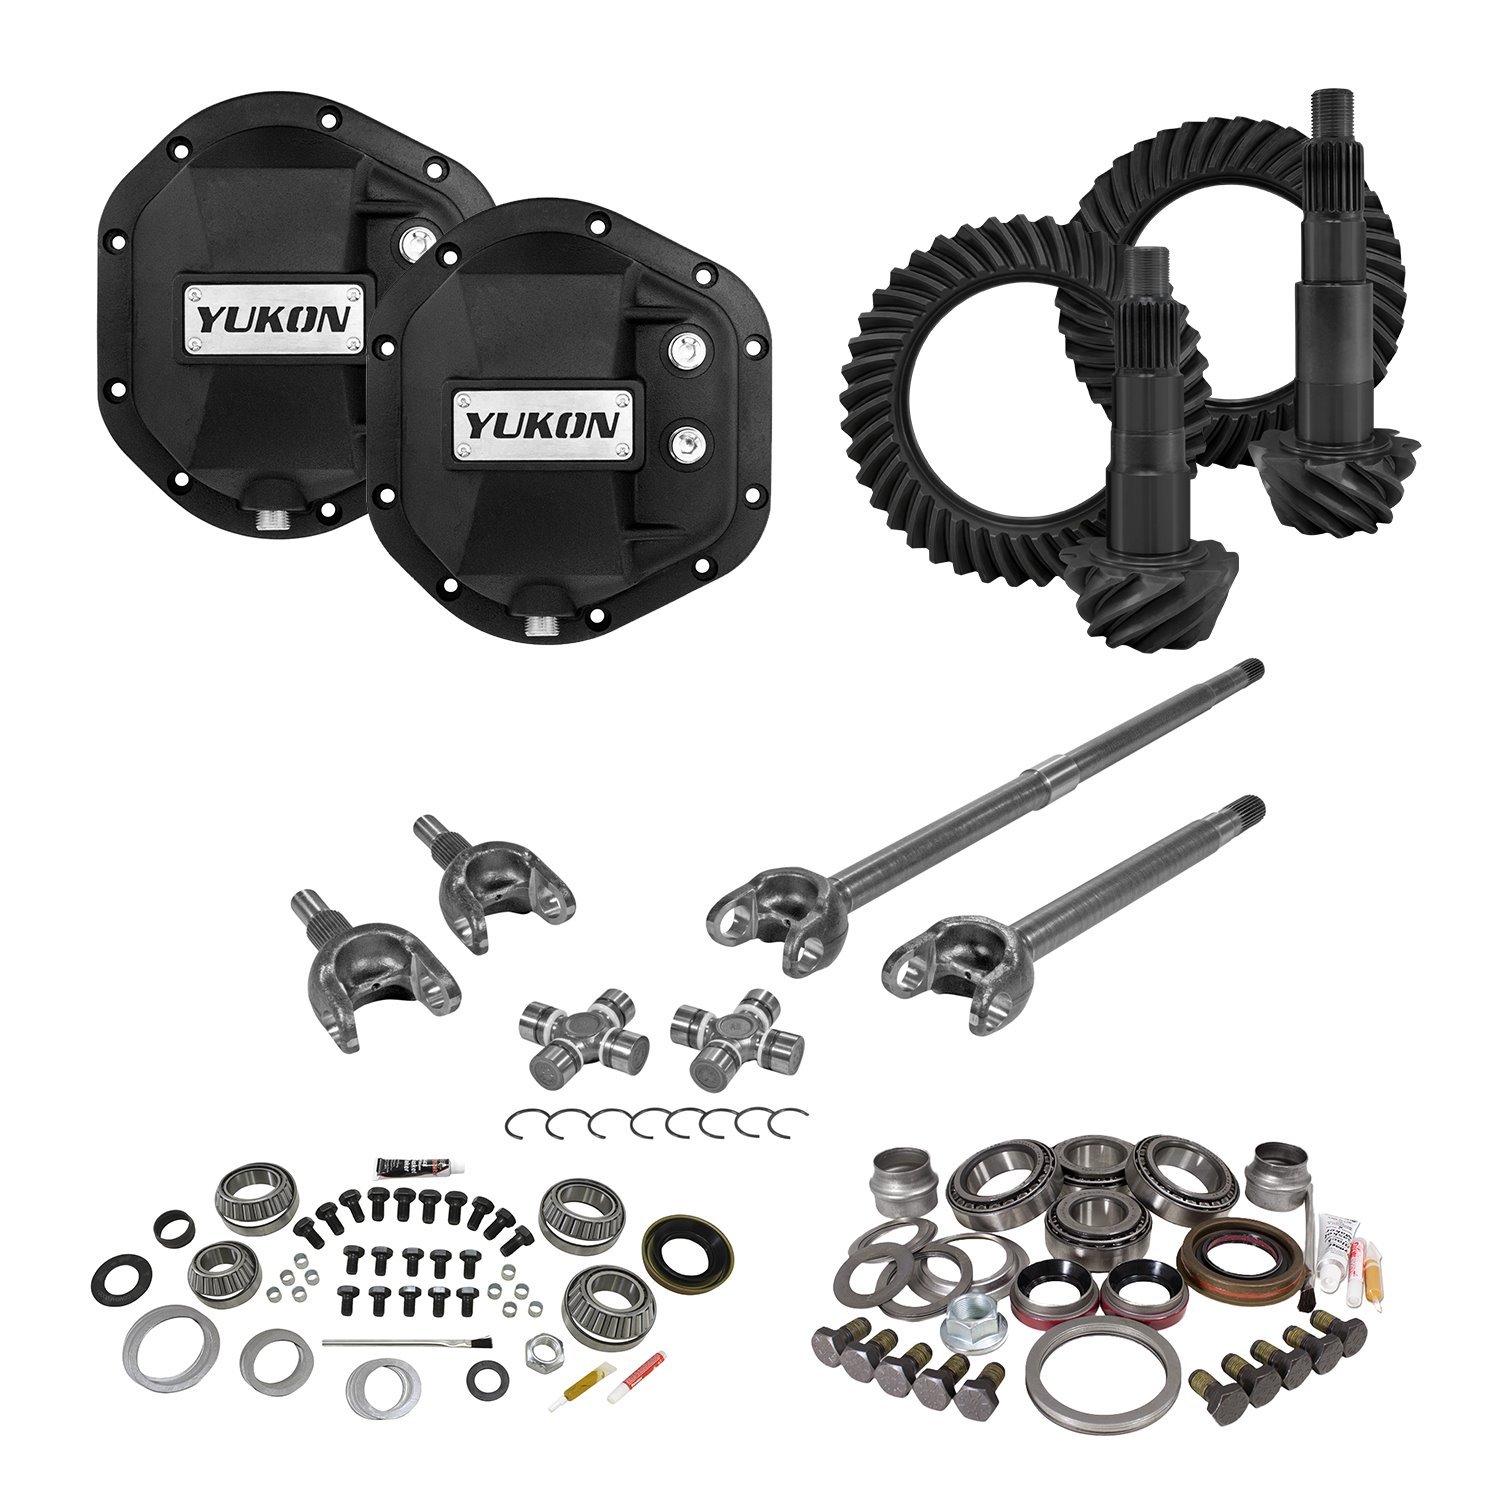 Stage 3 Jeep Jk Re-Gear Kit W/Covers & Front Axles, Dana 44, 4.11 Ratio